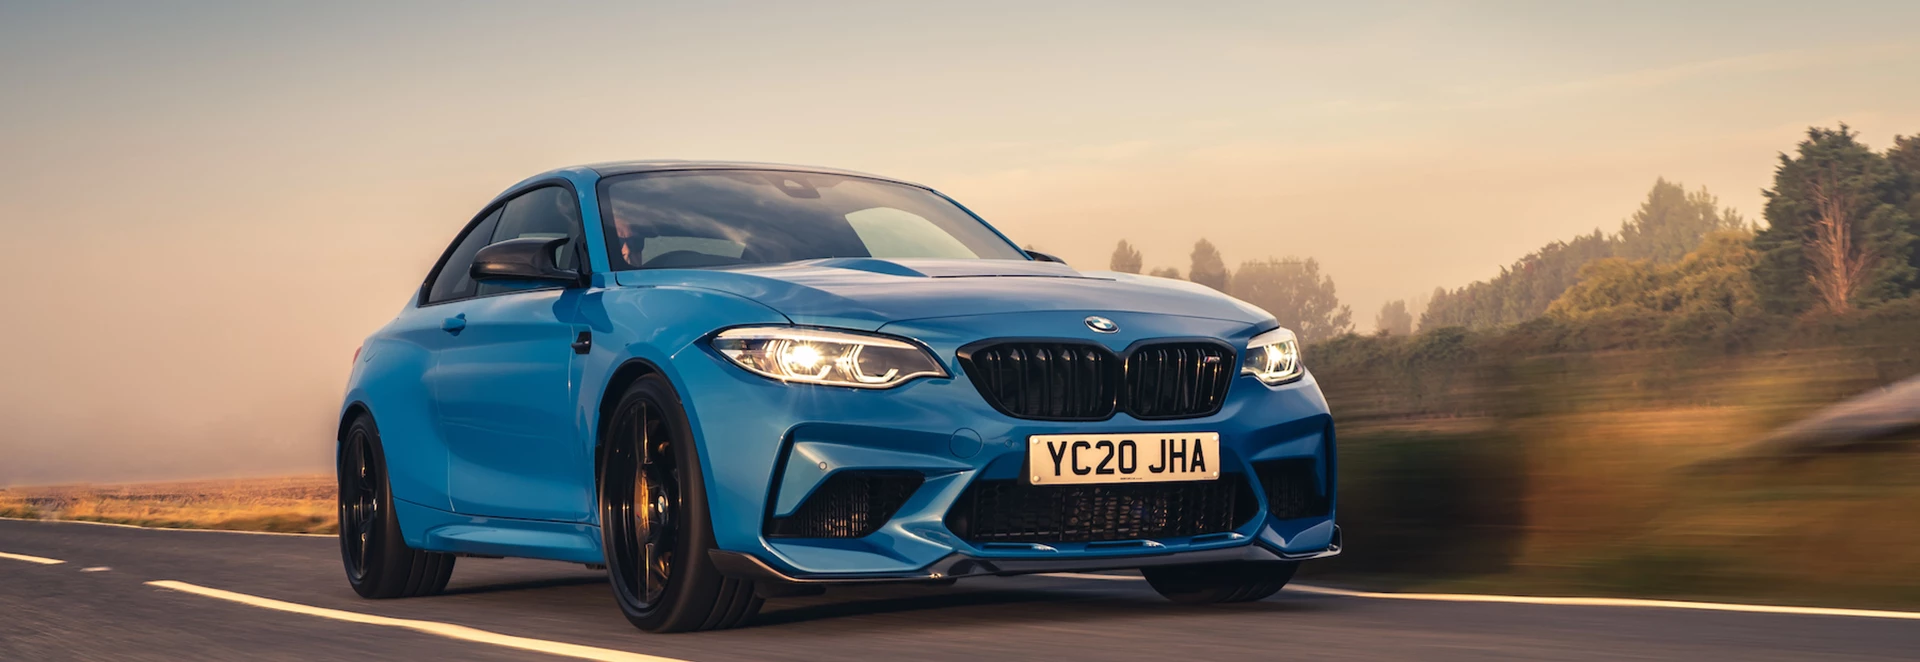 10 best new performance cars 2021 